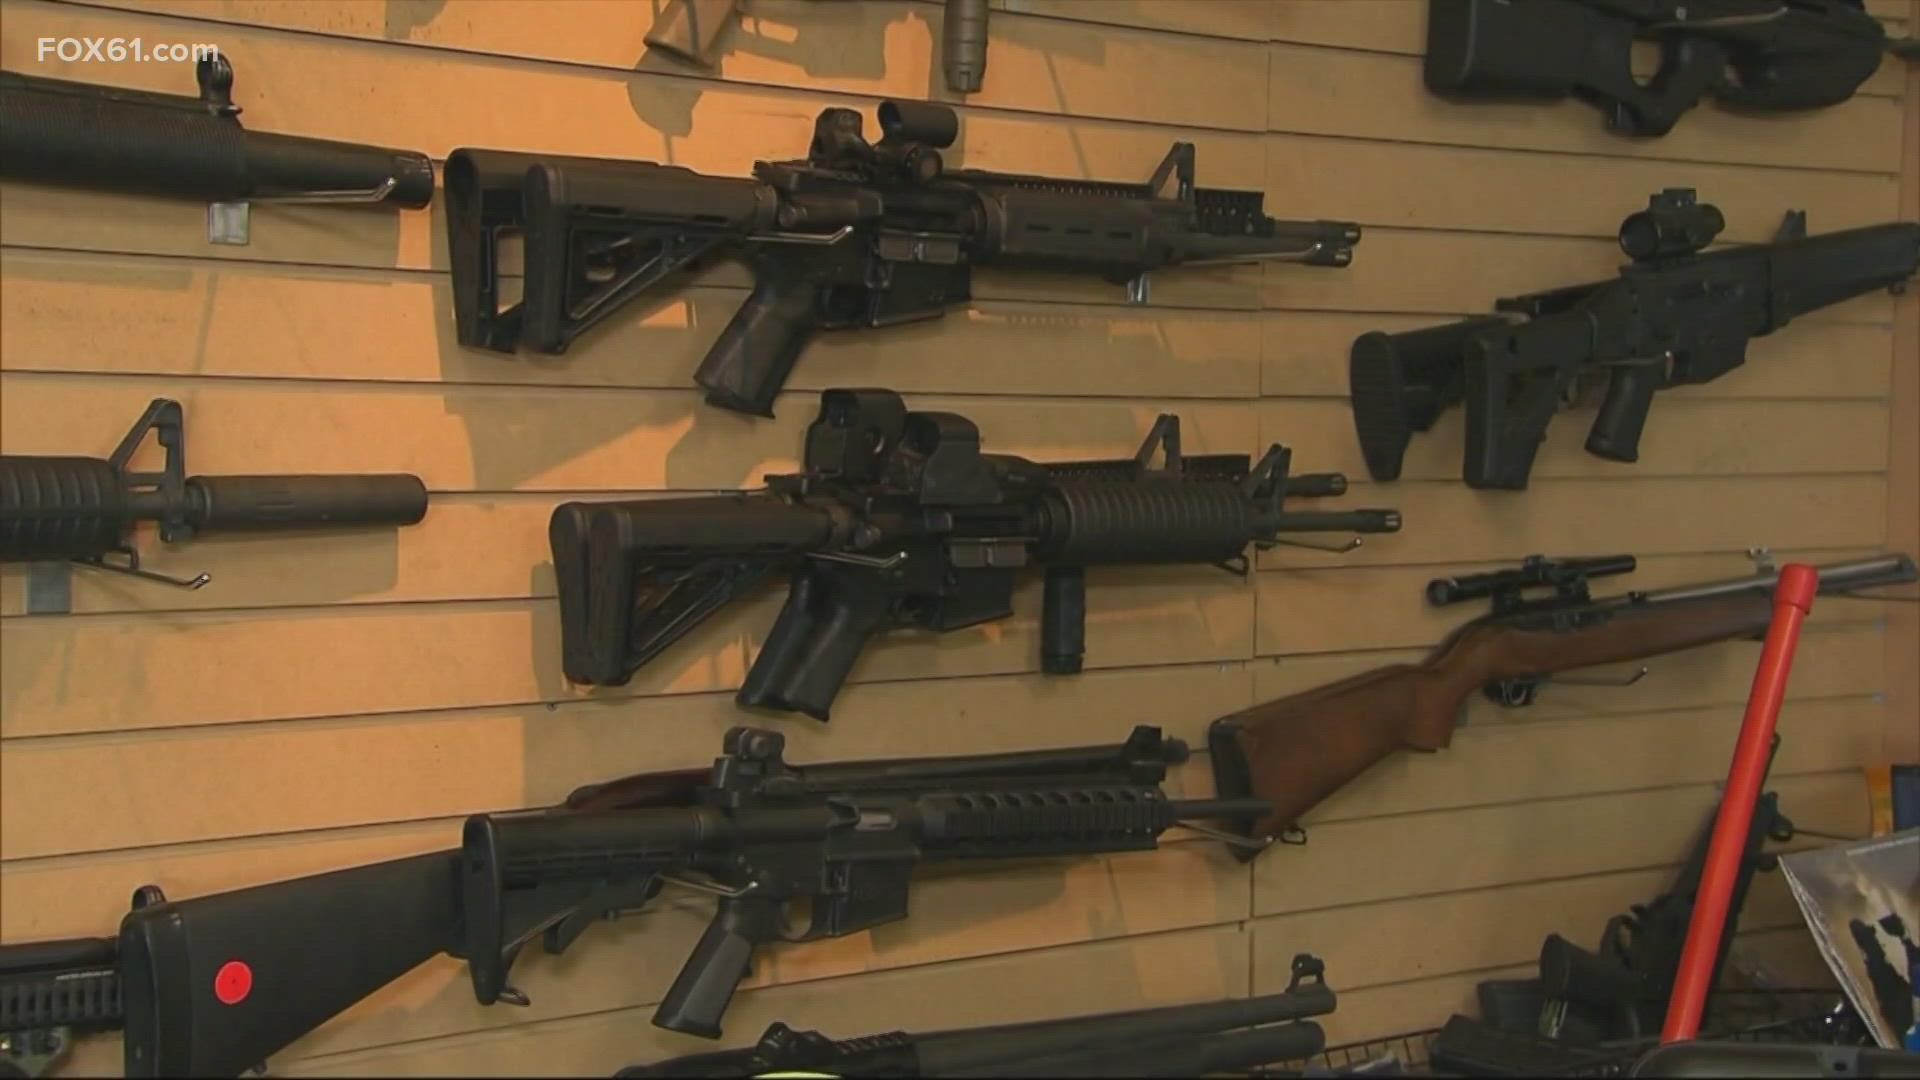 The bill would require background checks for sale or transfer of all firearms.